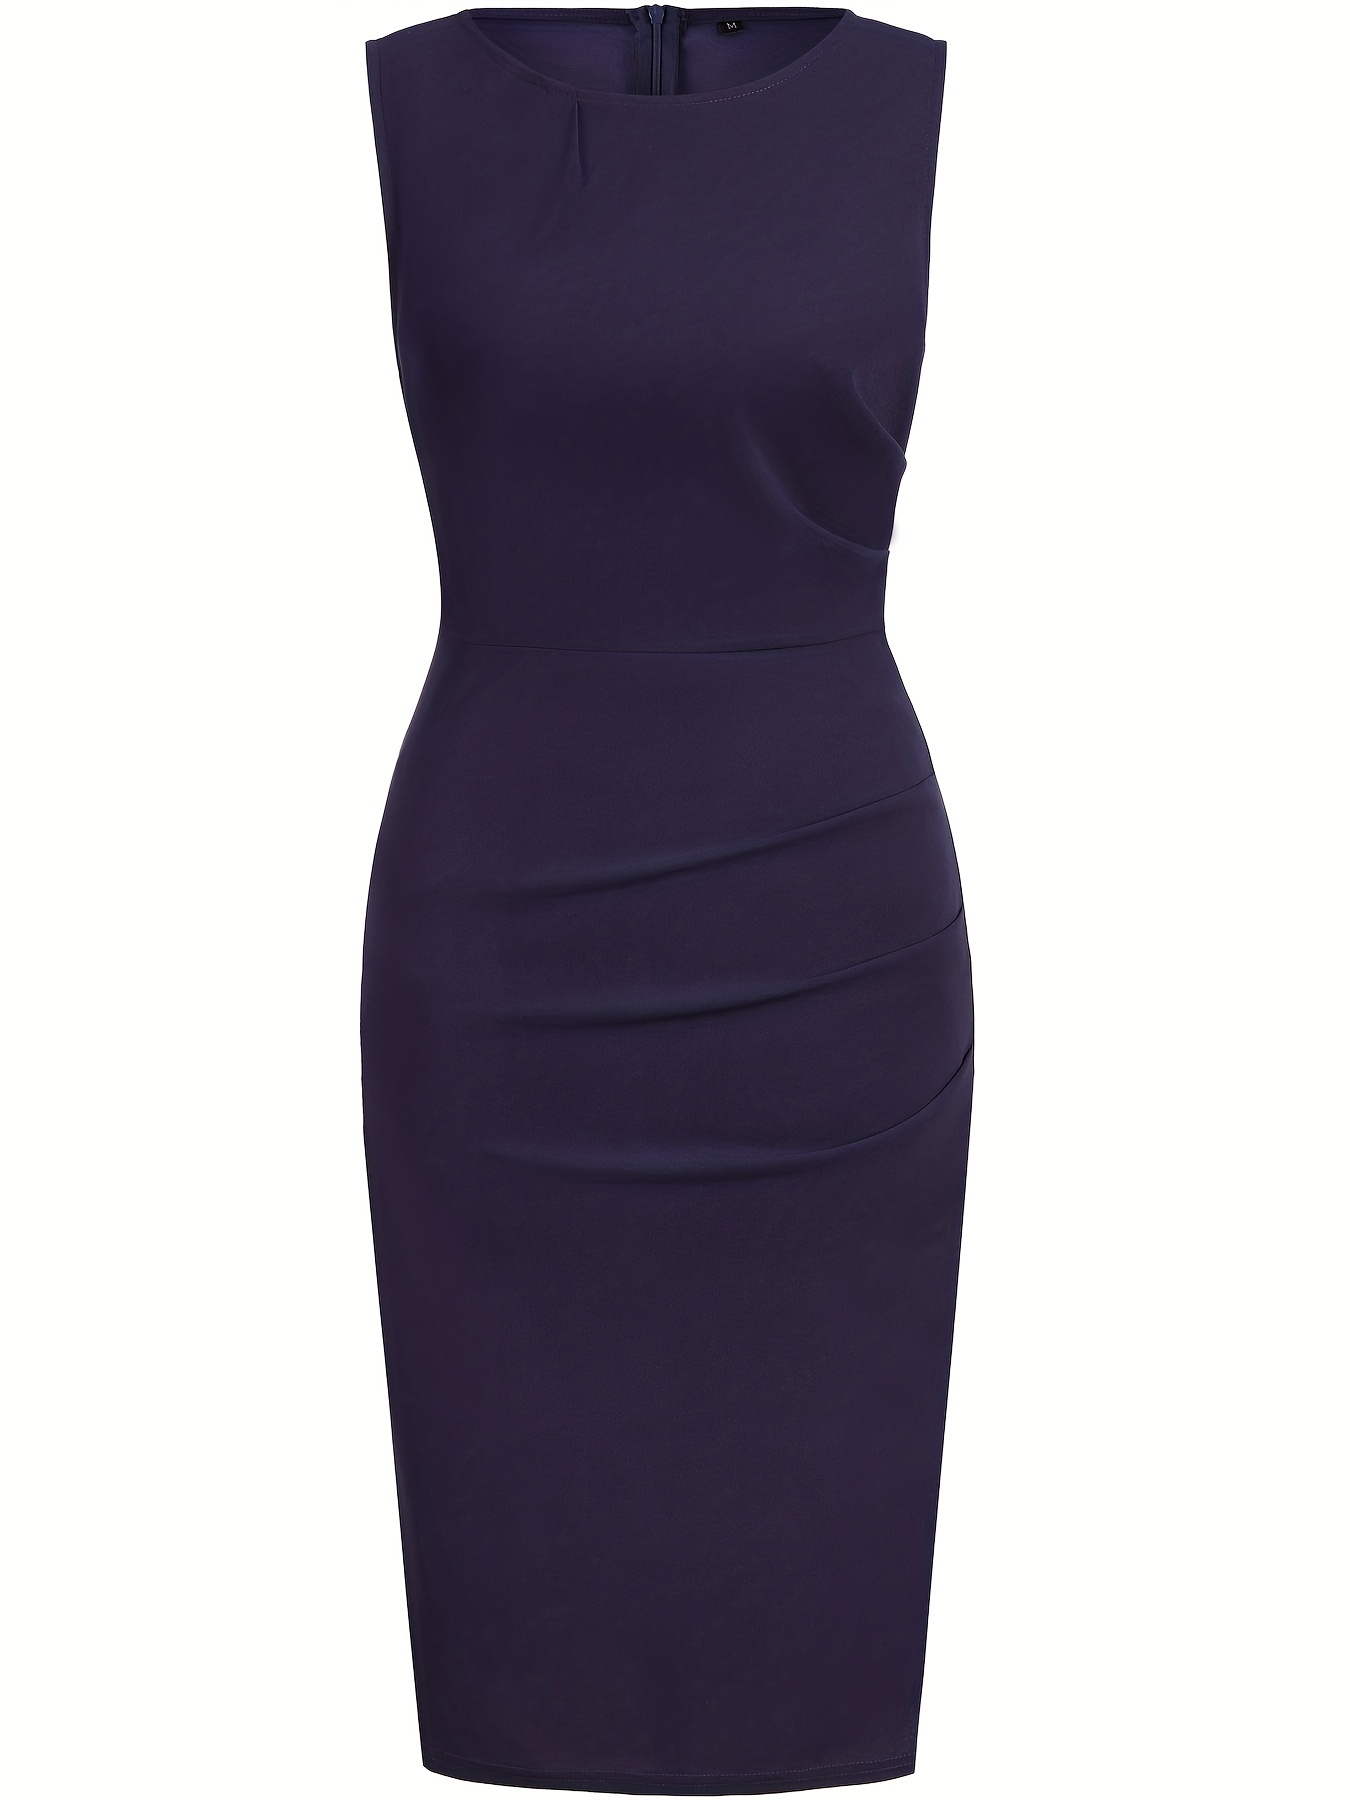 ruched pencil dress elegant crew neck sleeveless work office dress womens clothing details 37